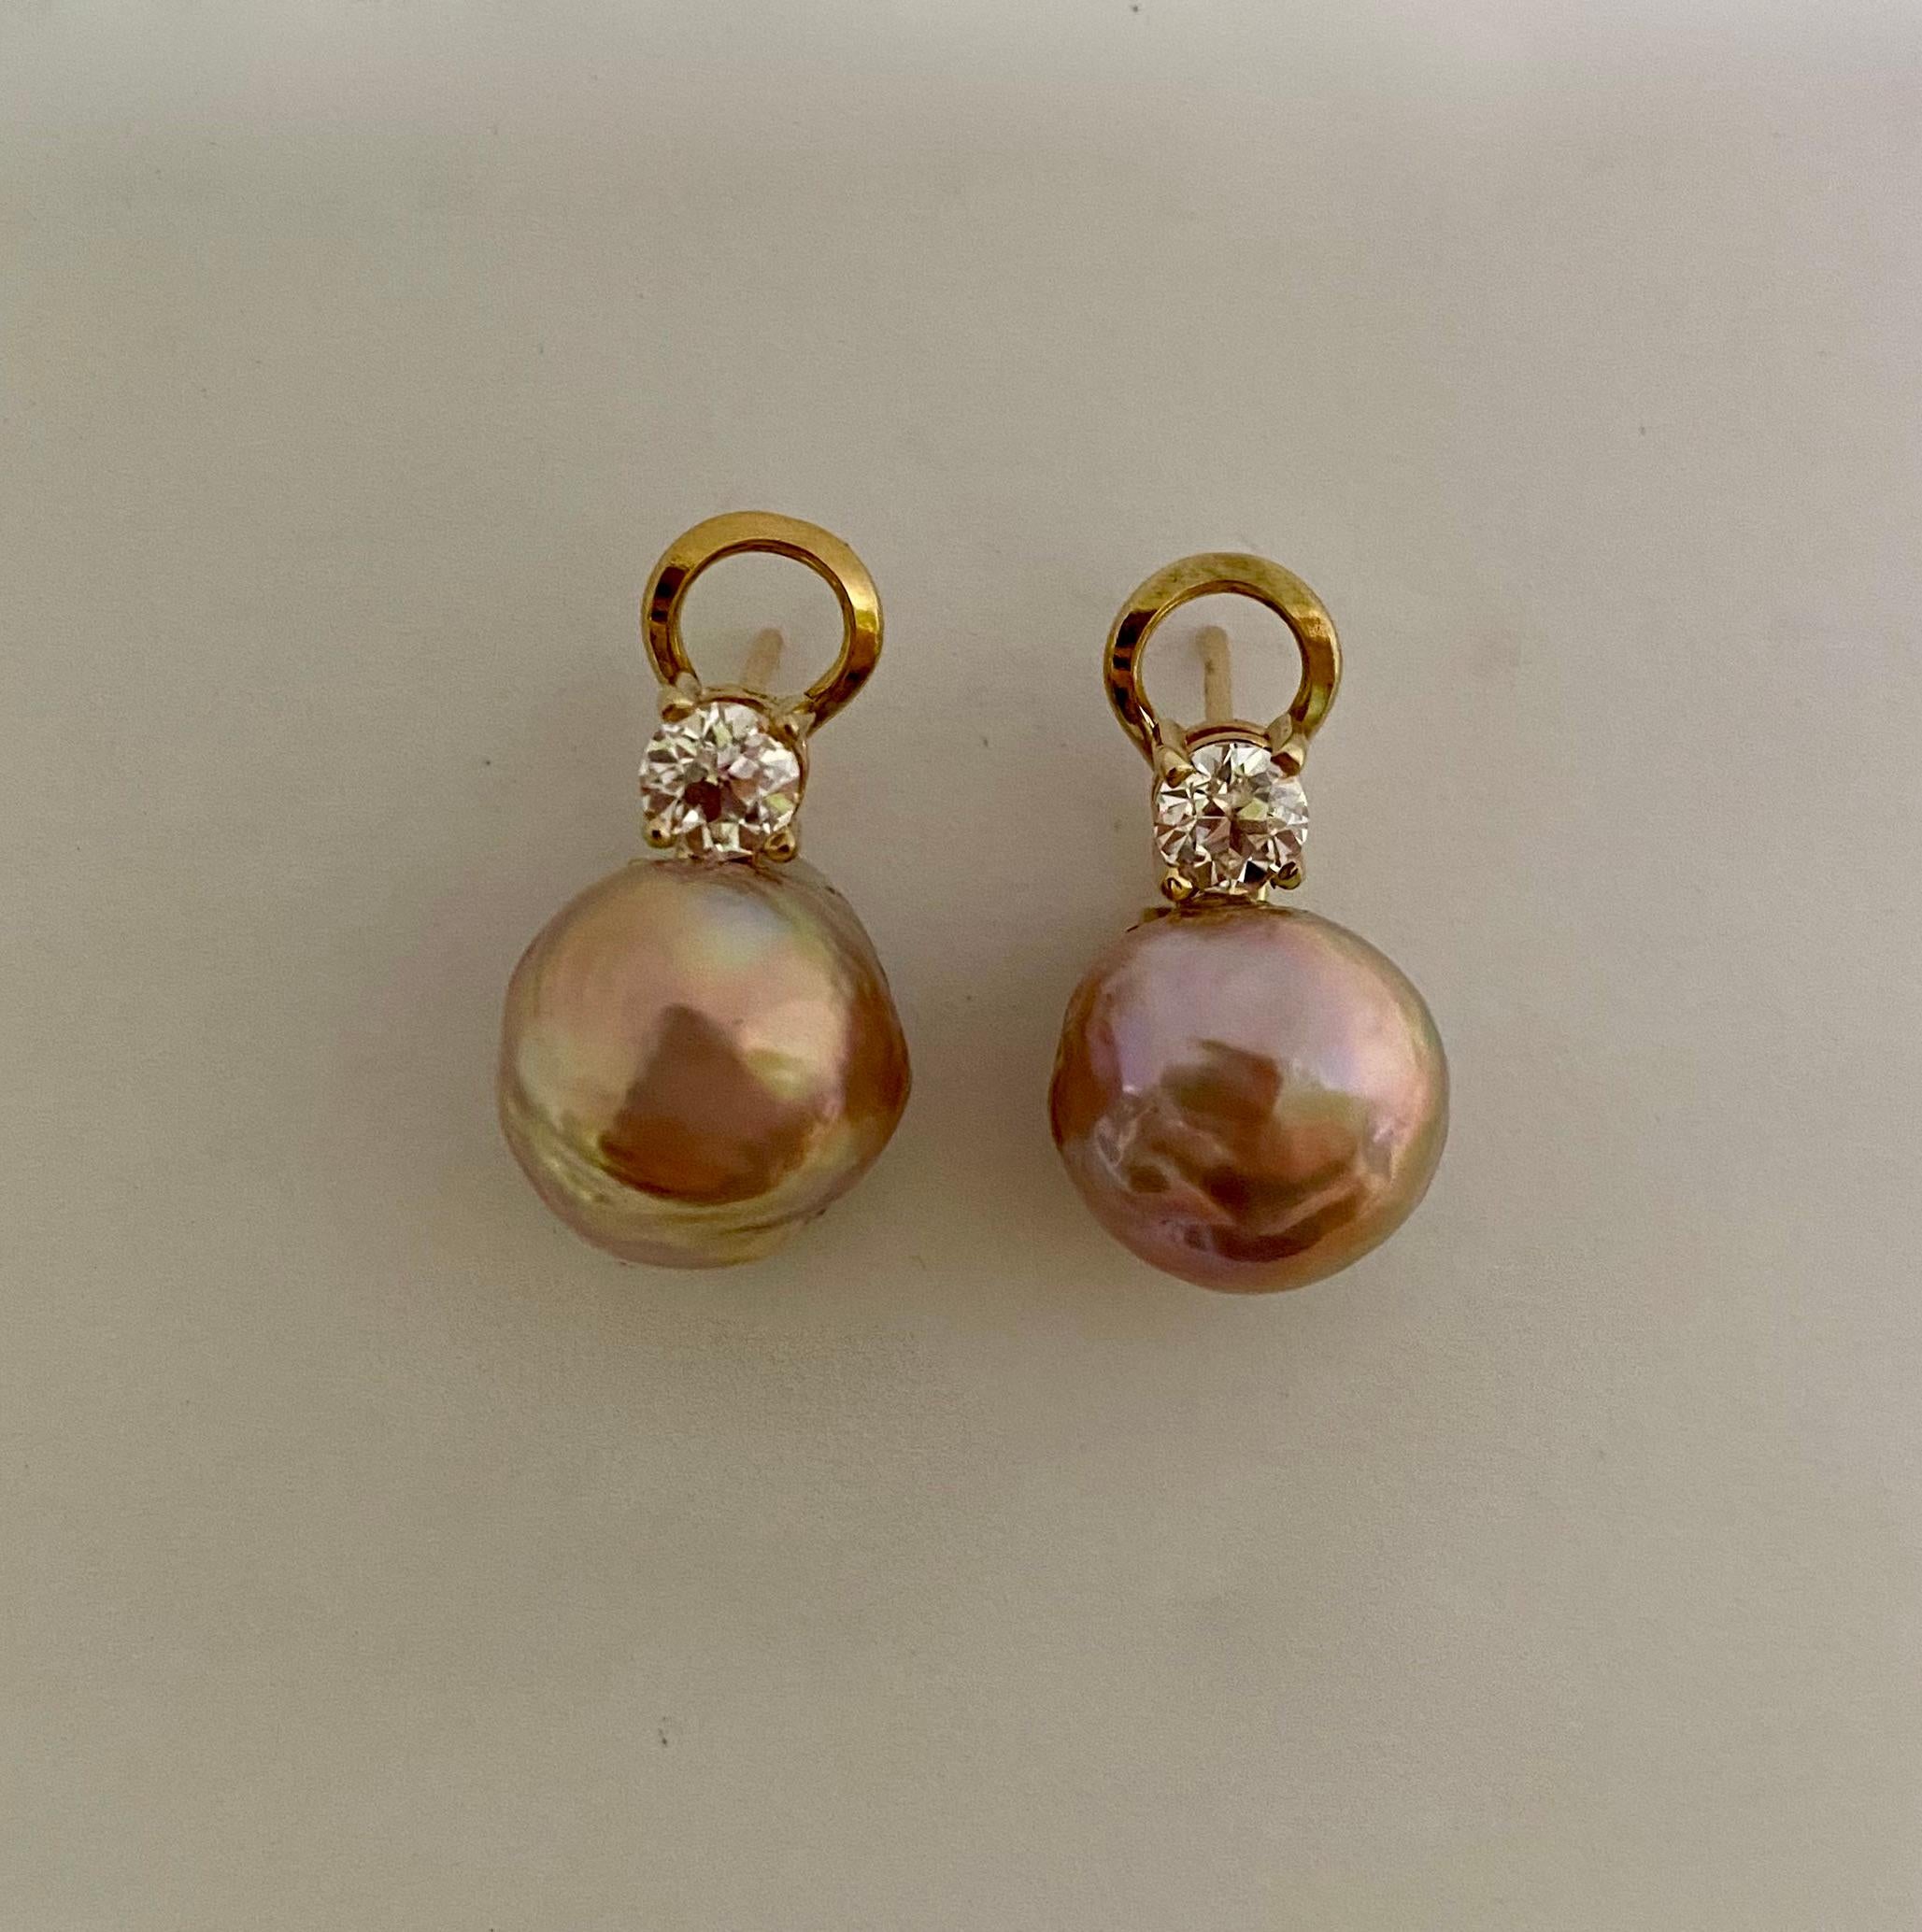 Pink Kasumi pearls are paired with diamonds in these classic drop earrings.  The baroque pearls (origin: Japan) possess a base pink color but their rich luster reflects a range on other colors including green and gold.  The pearls are complimented